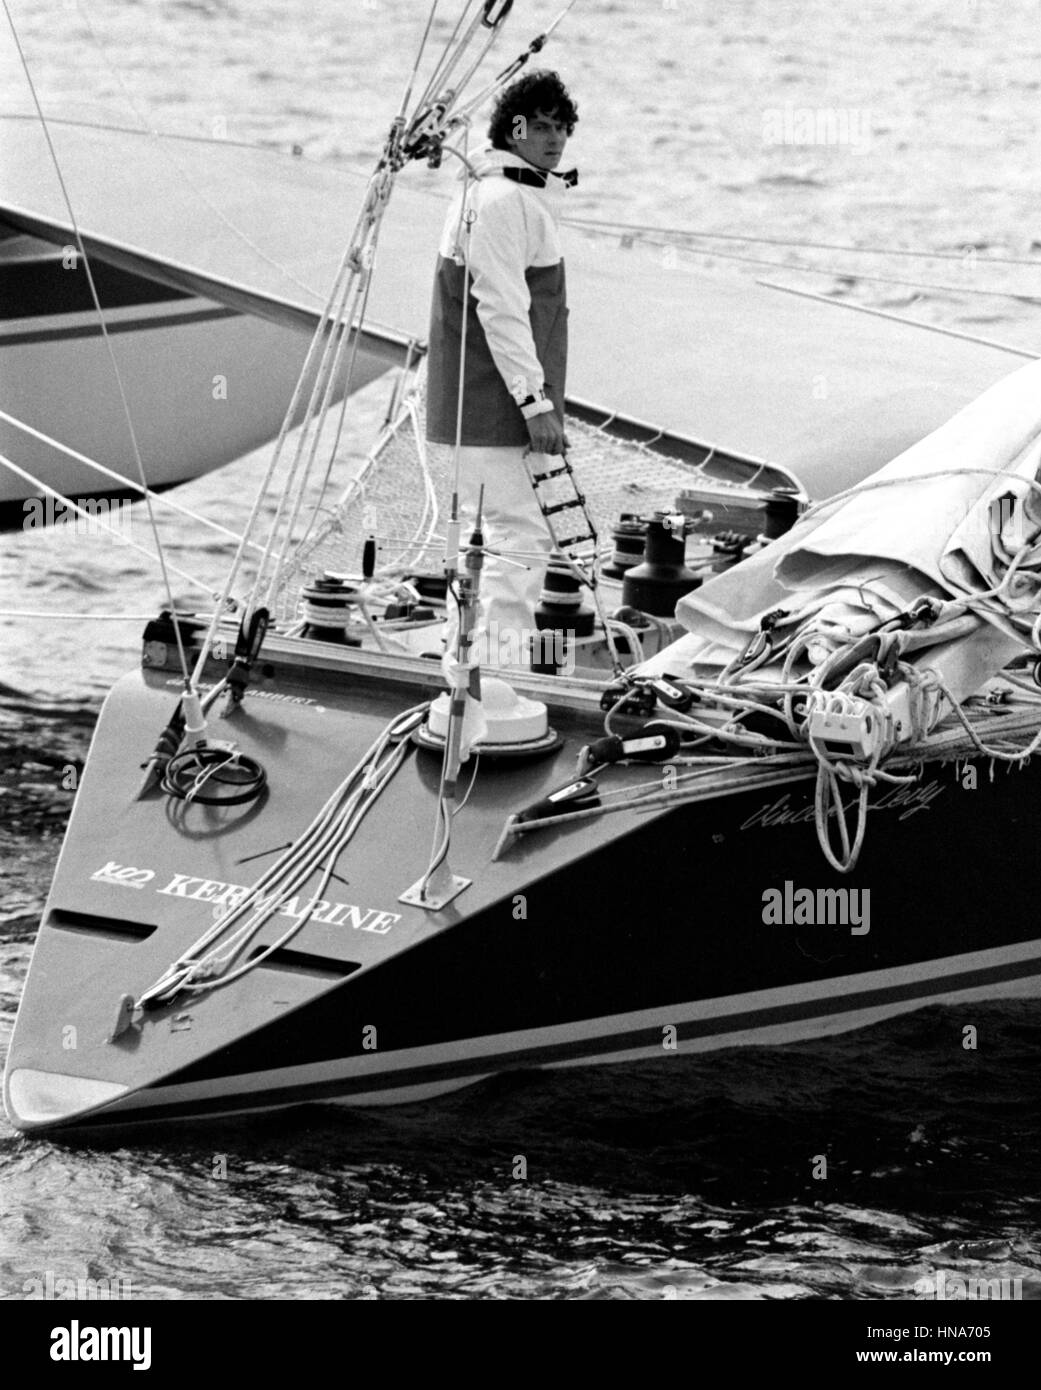 Trimaran yacht Black and White Stock Photos & Images - Alamy